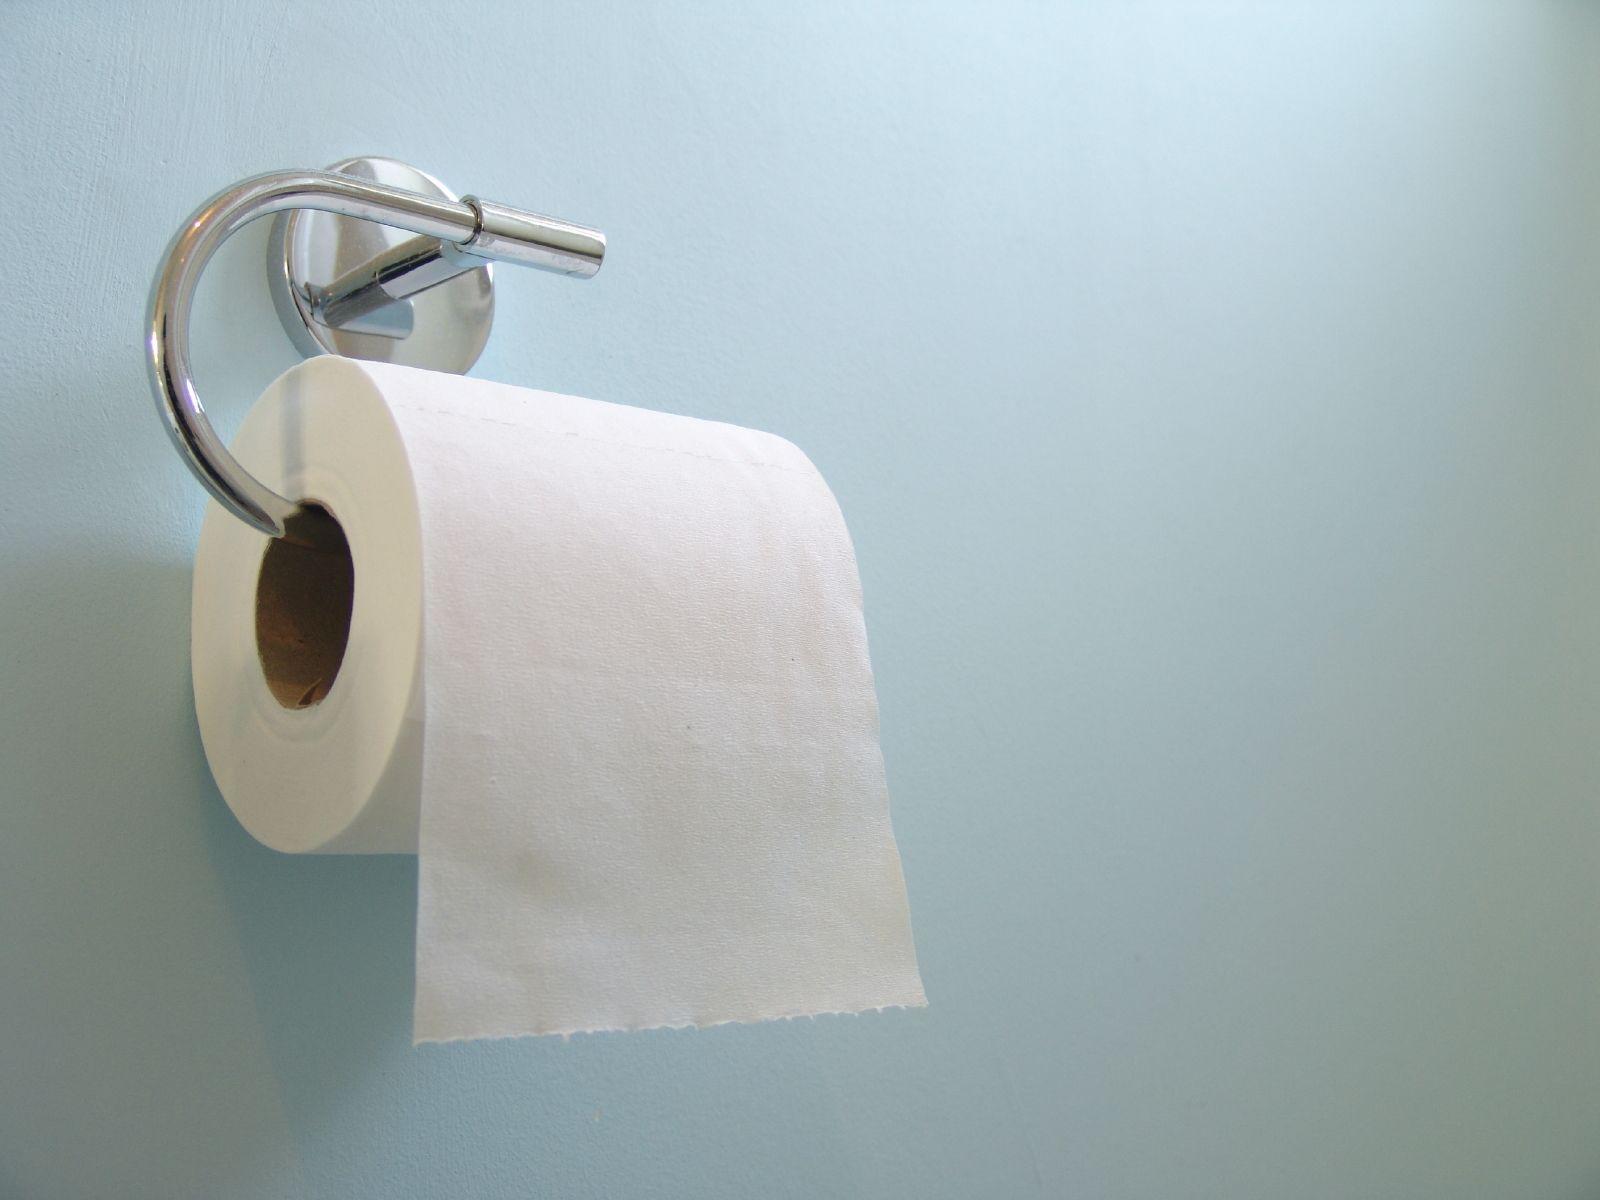 Picture Of Toilet Paper Group with items